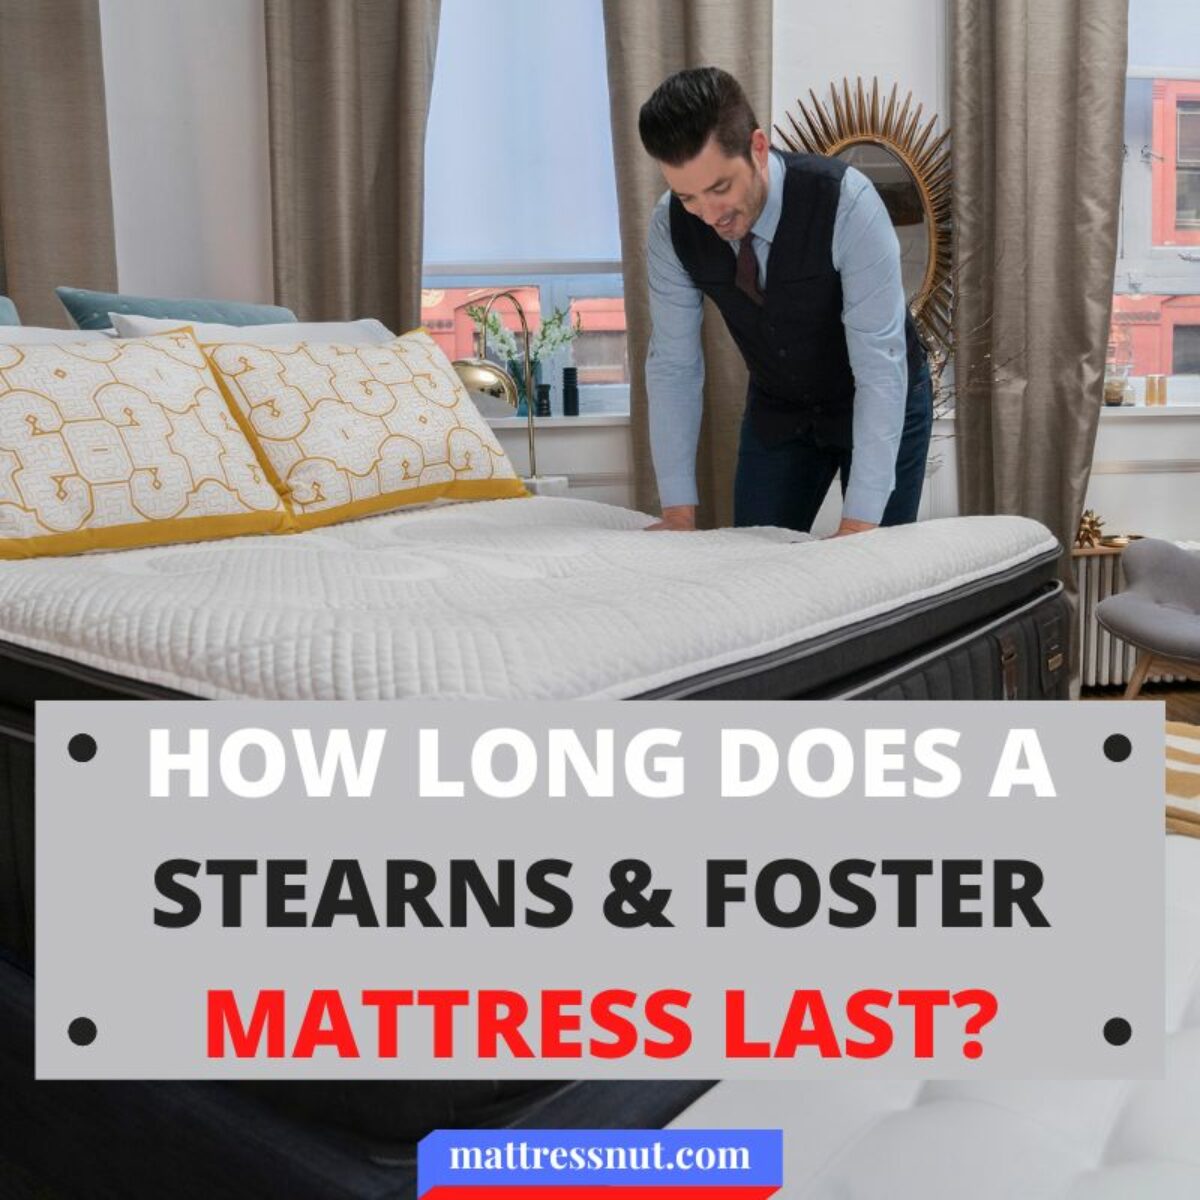 How Long Does A Stearns & Foster Mattress Last?